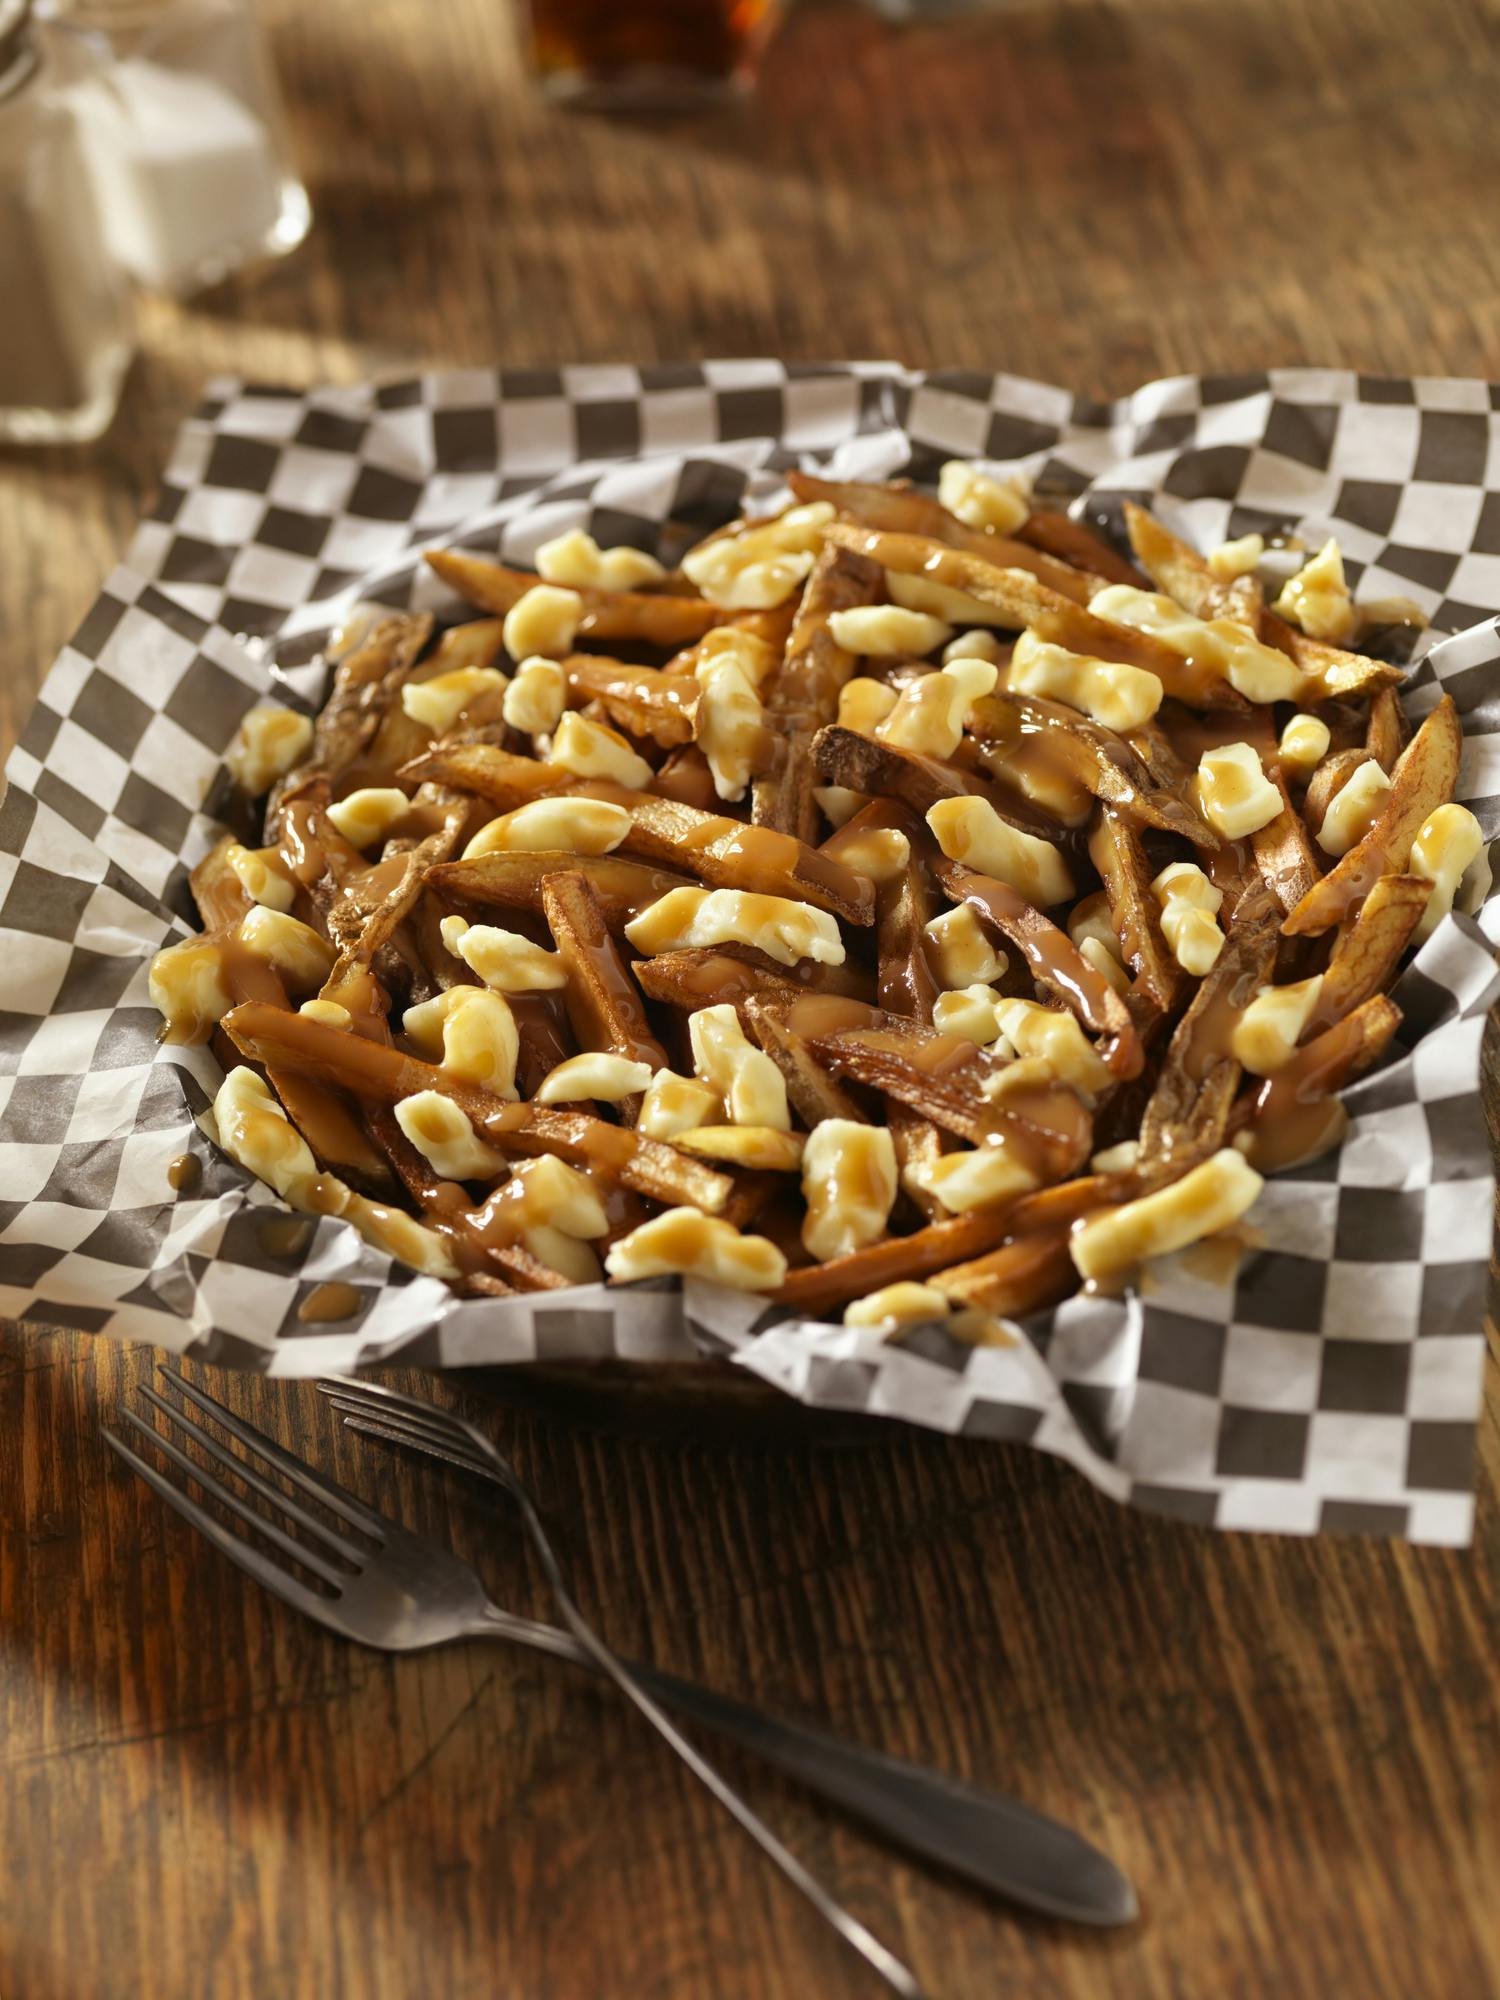 A bowl of poutine - chips, gravy and cheese curds